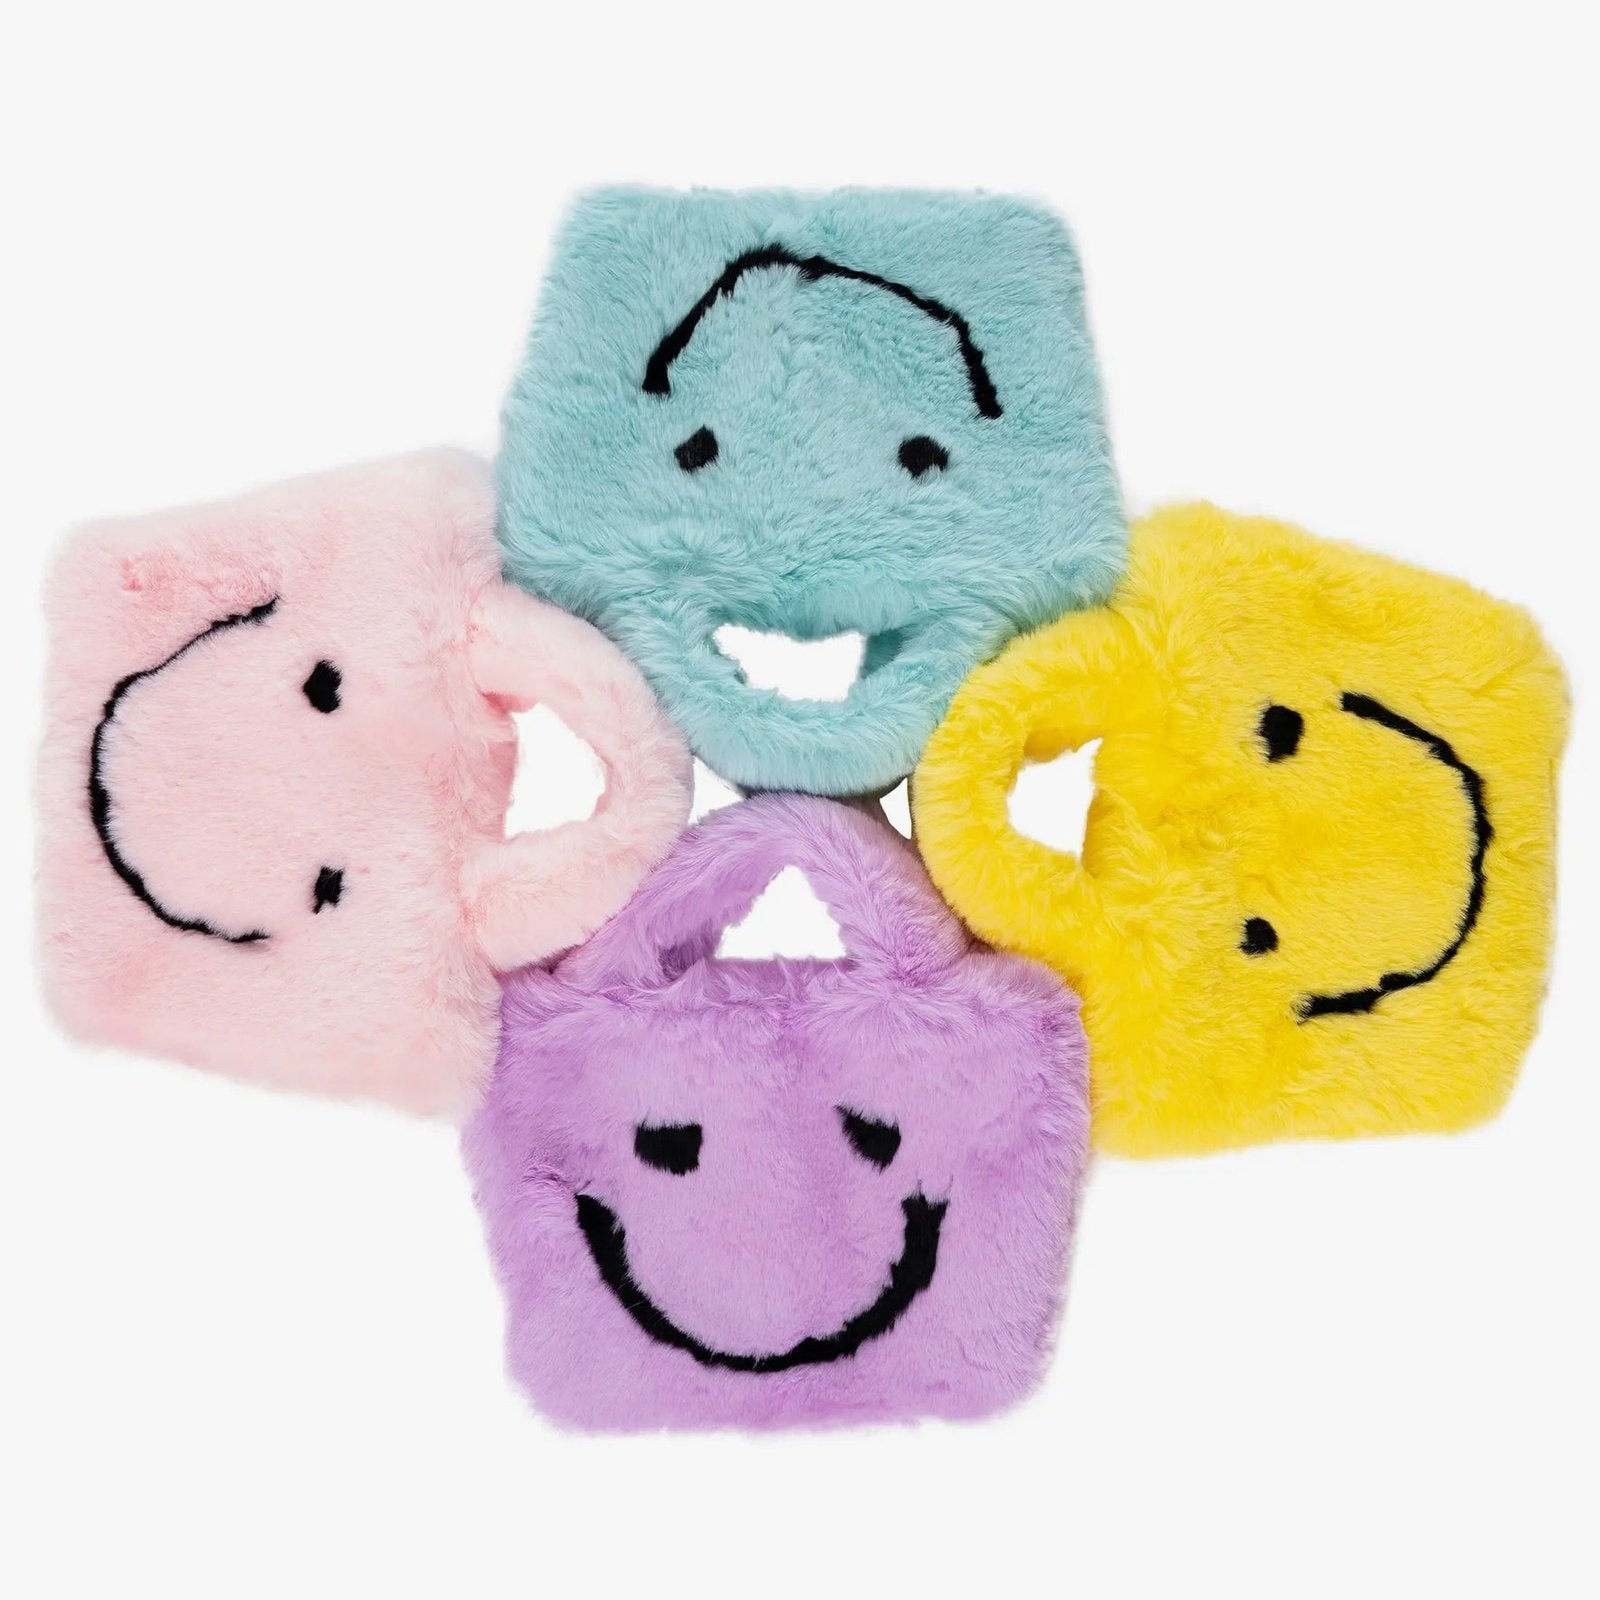 Awesome Smiley Face Bag - Super Fuzzy